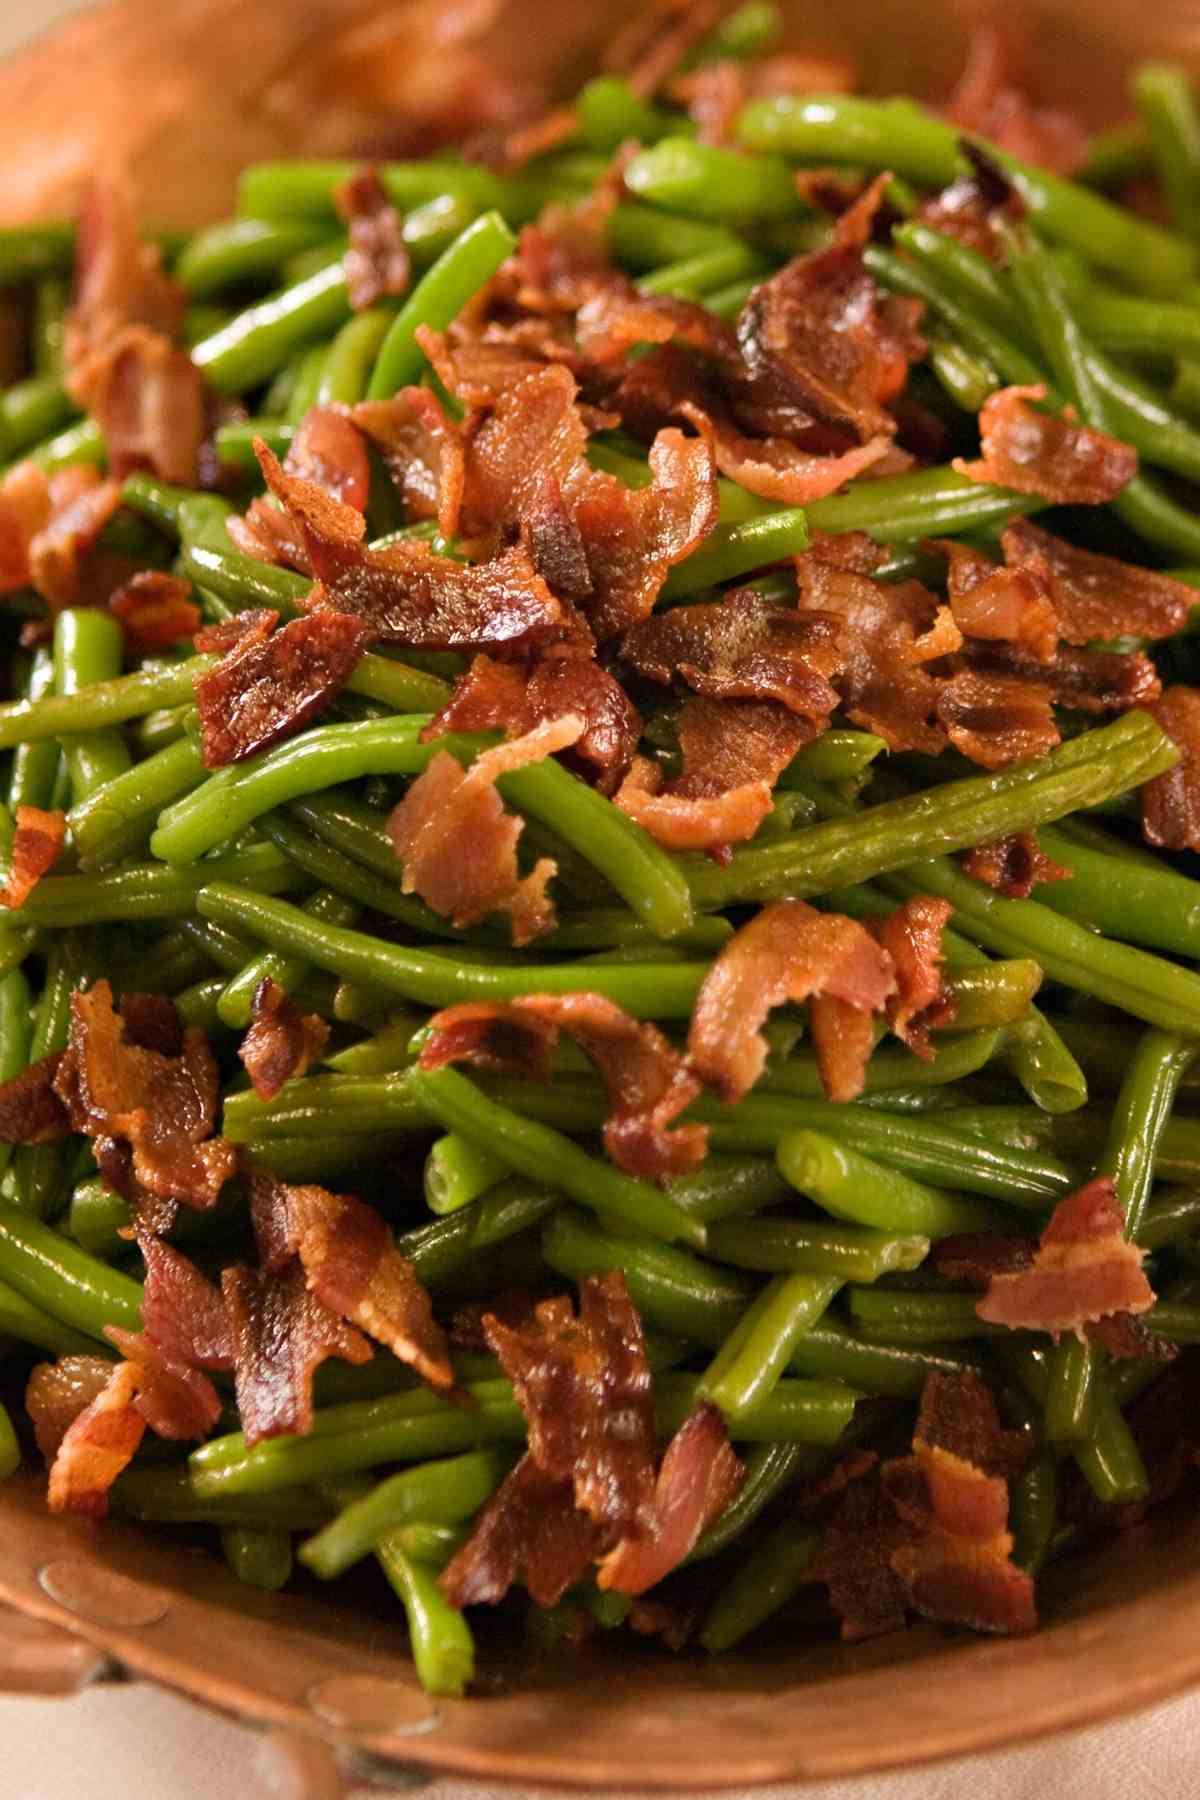 These Crack Green Beans are absolutely delicious! They’re crispy, sweet, and savory. If you can’t get your kids to eat their veggies, give this recipe a try!